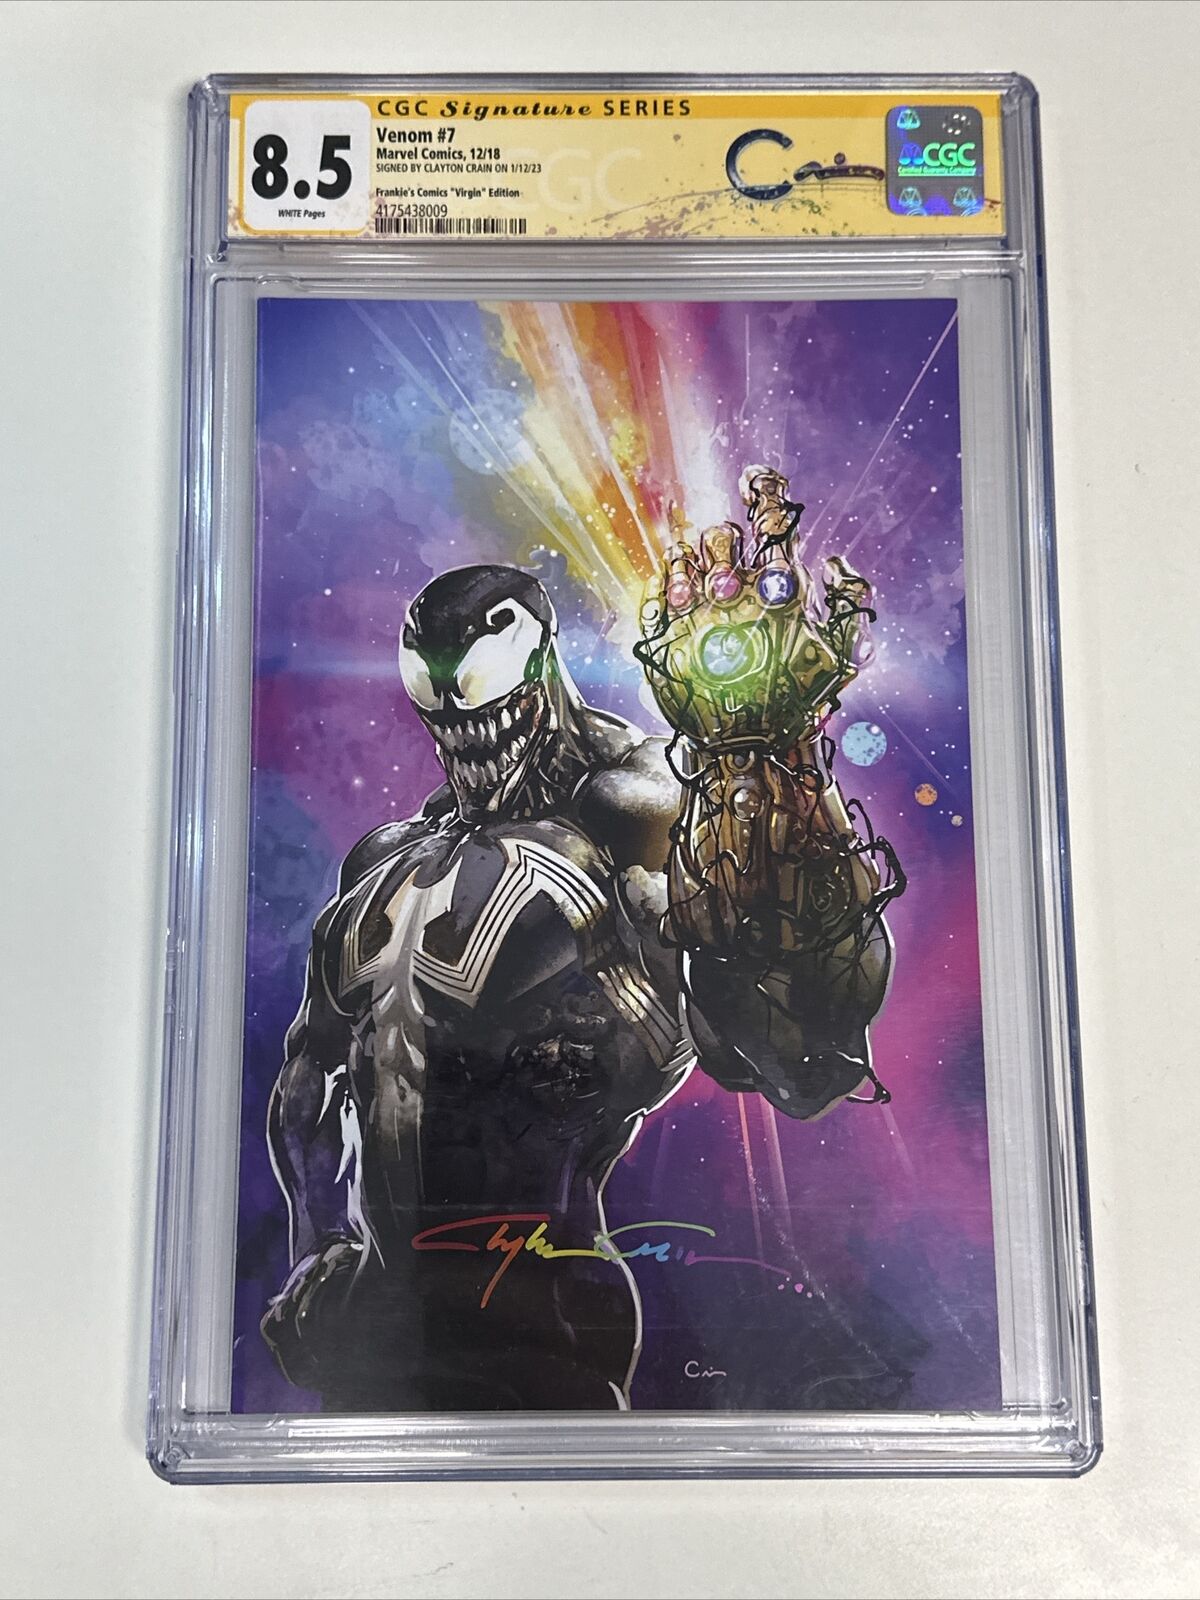 Venom #7 Virgin CGC SS 8.5 Signed by Clayton Crain Infinity - Special Label